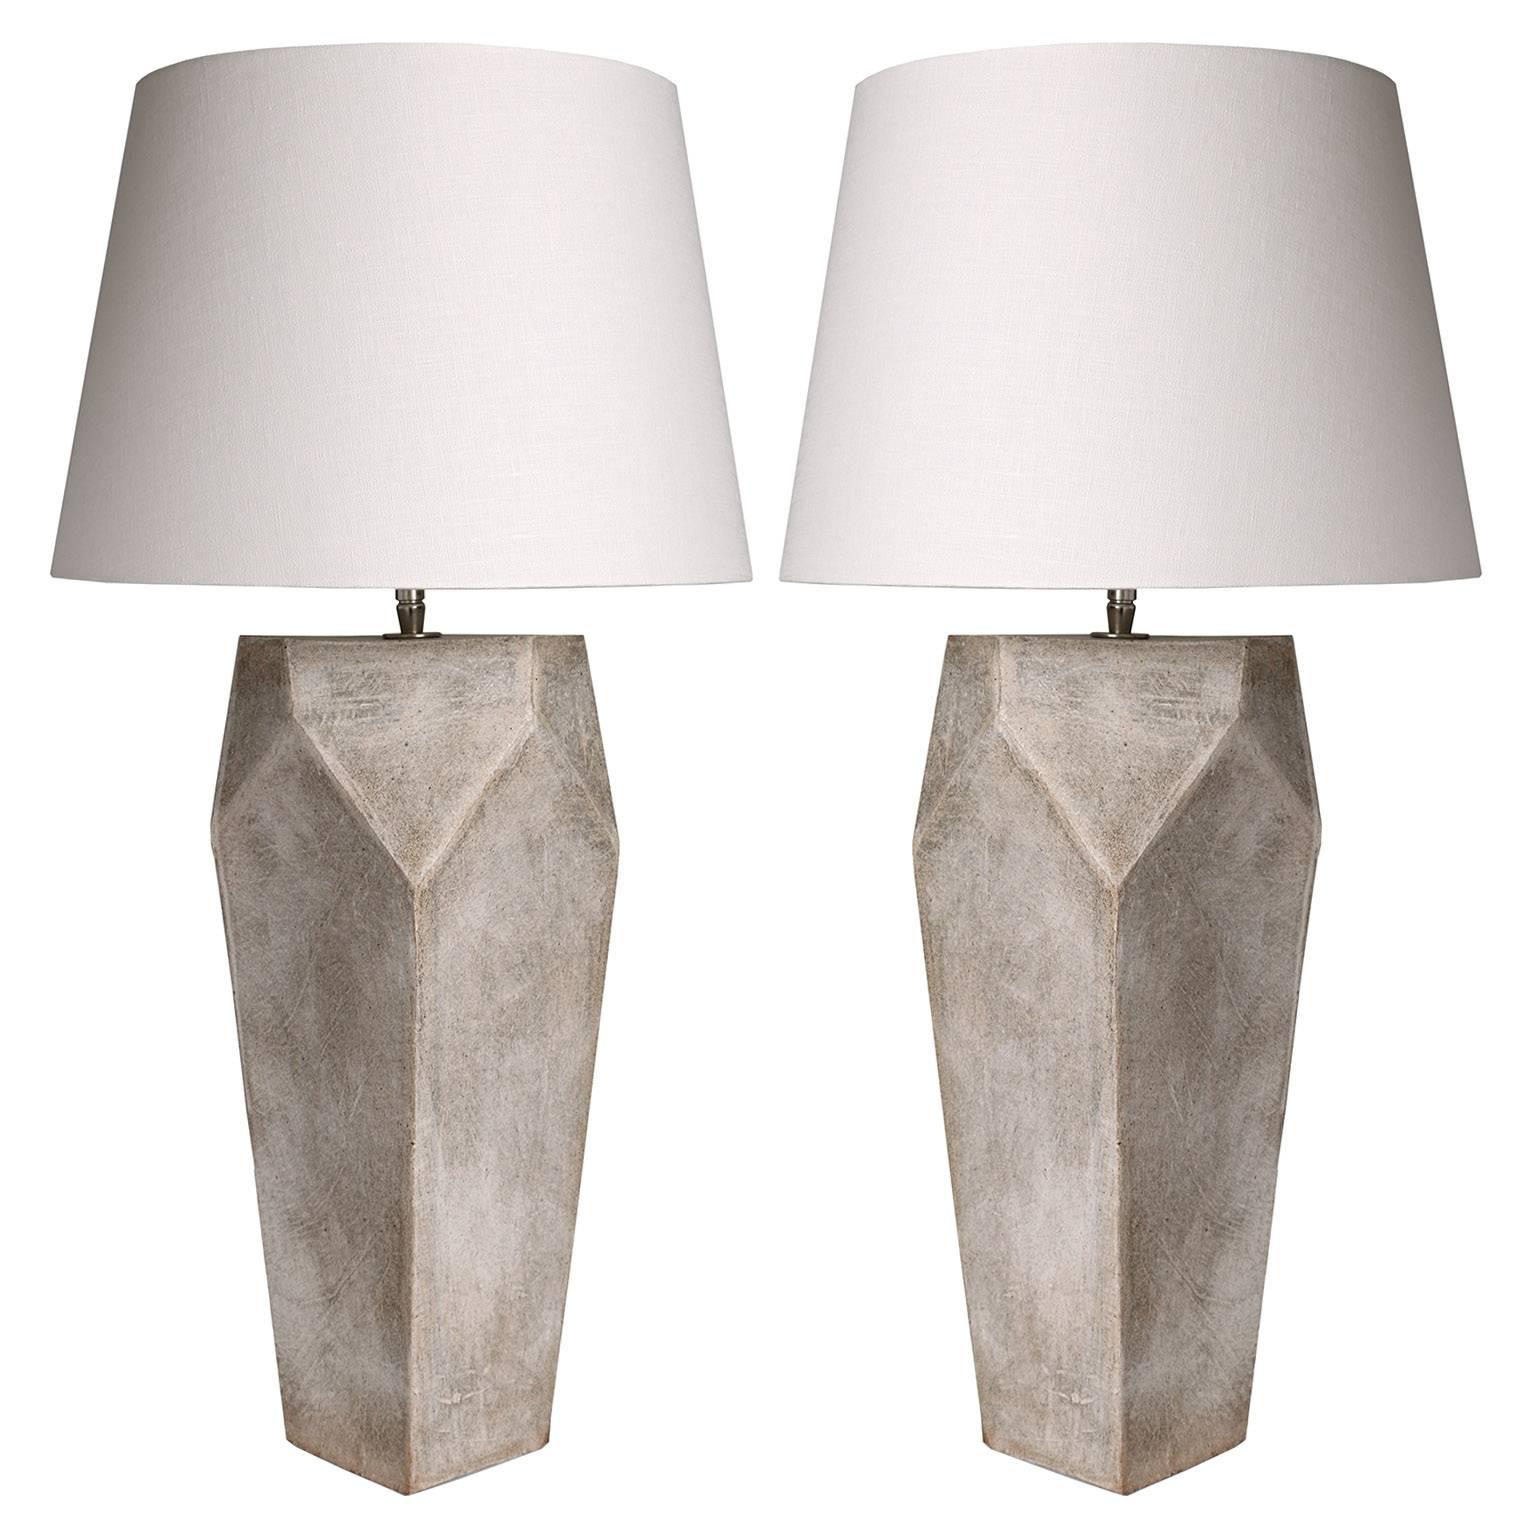 John Sheppard "Tower" Stoneware Table Lamps For Sale